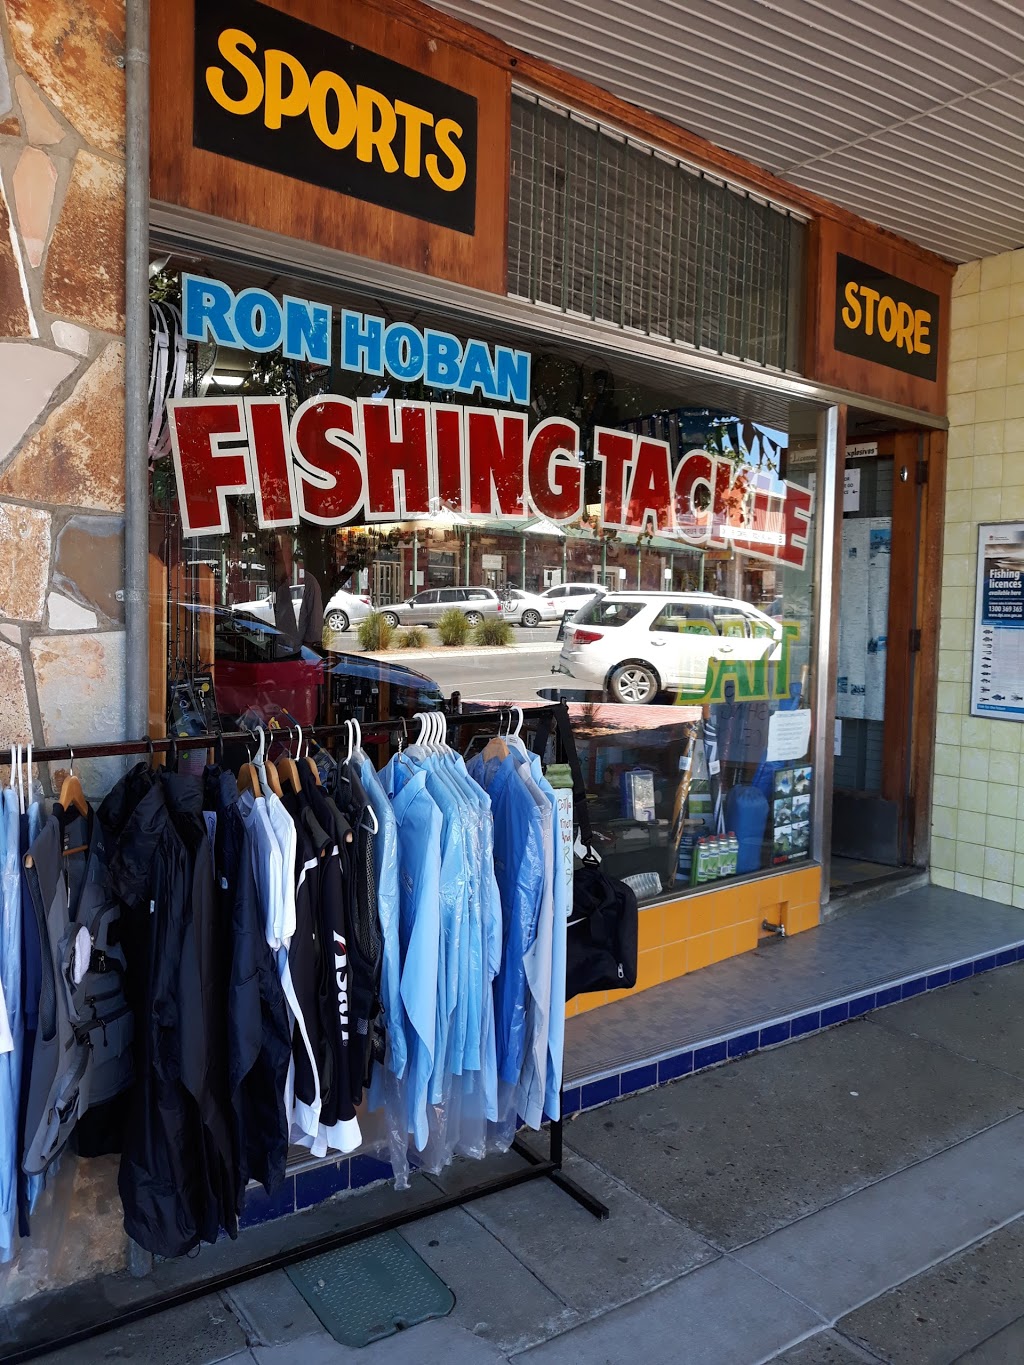 Hobies Sports Store | store | 36A Hanson St, Corryong VIC 3707, Australia | 0417192149 OR +61 417 192 149